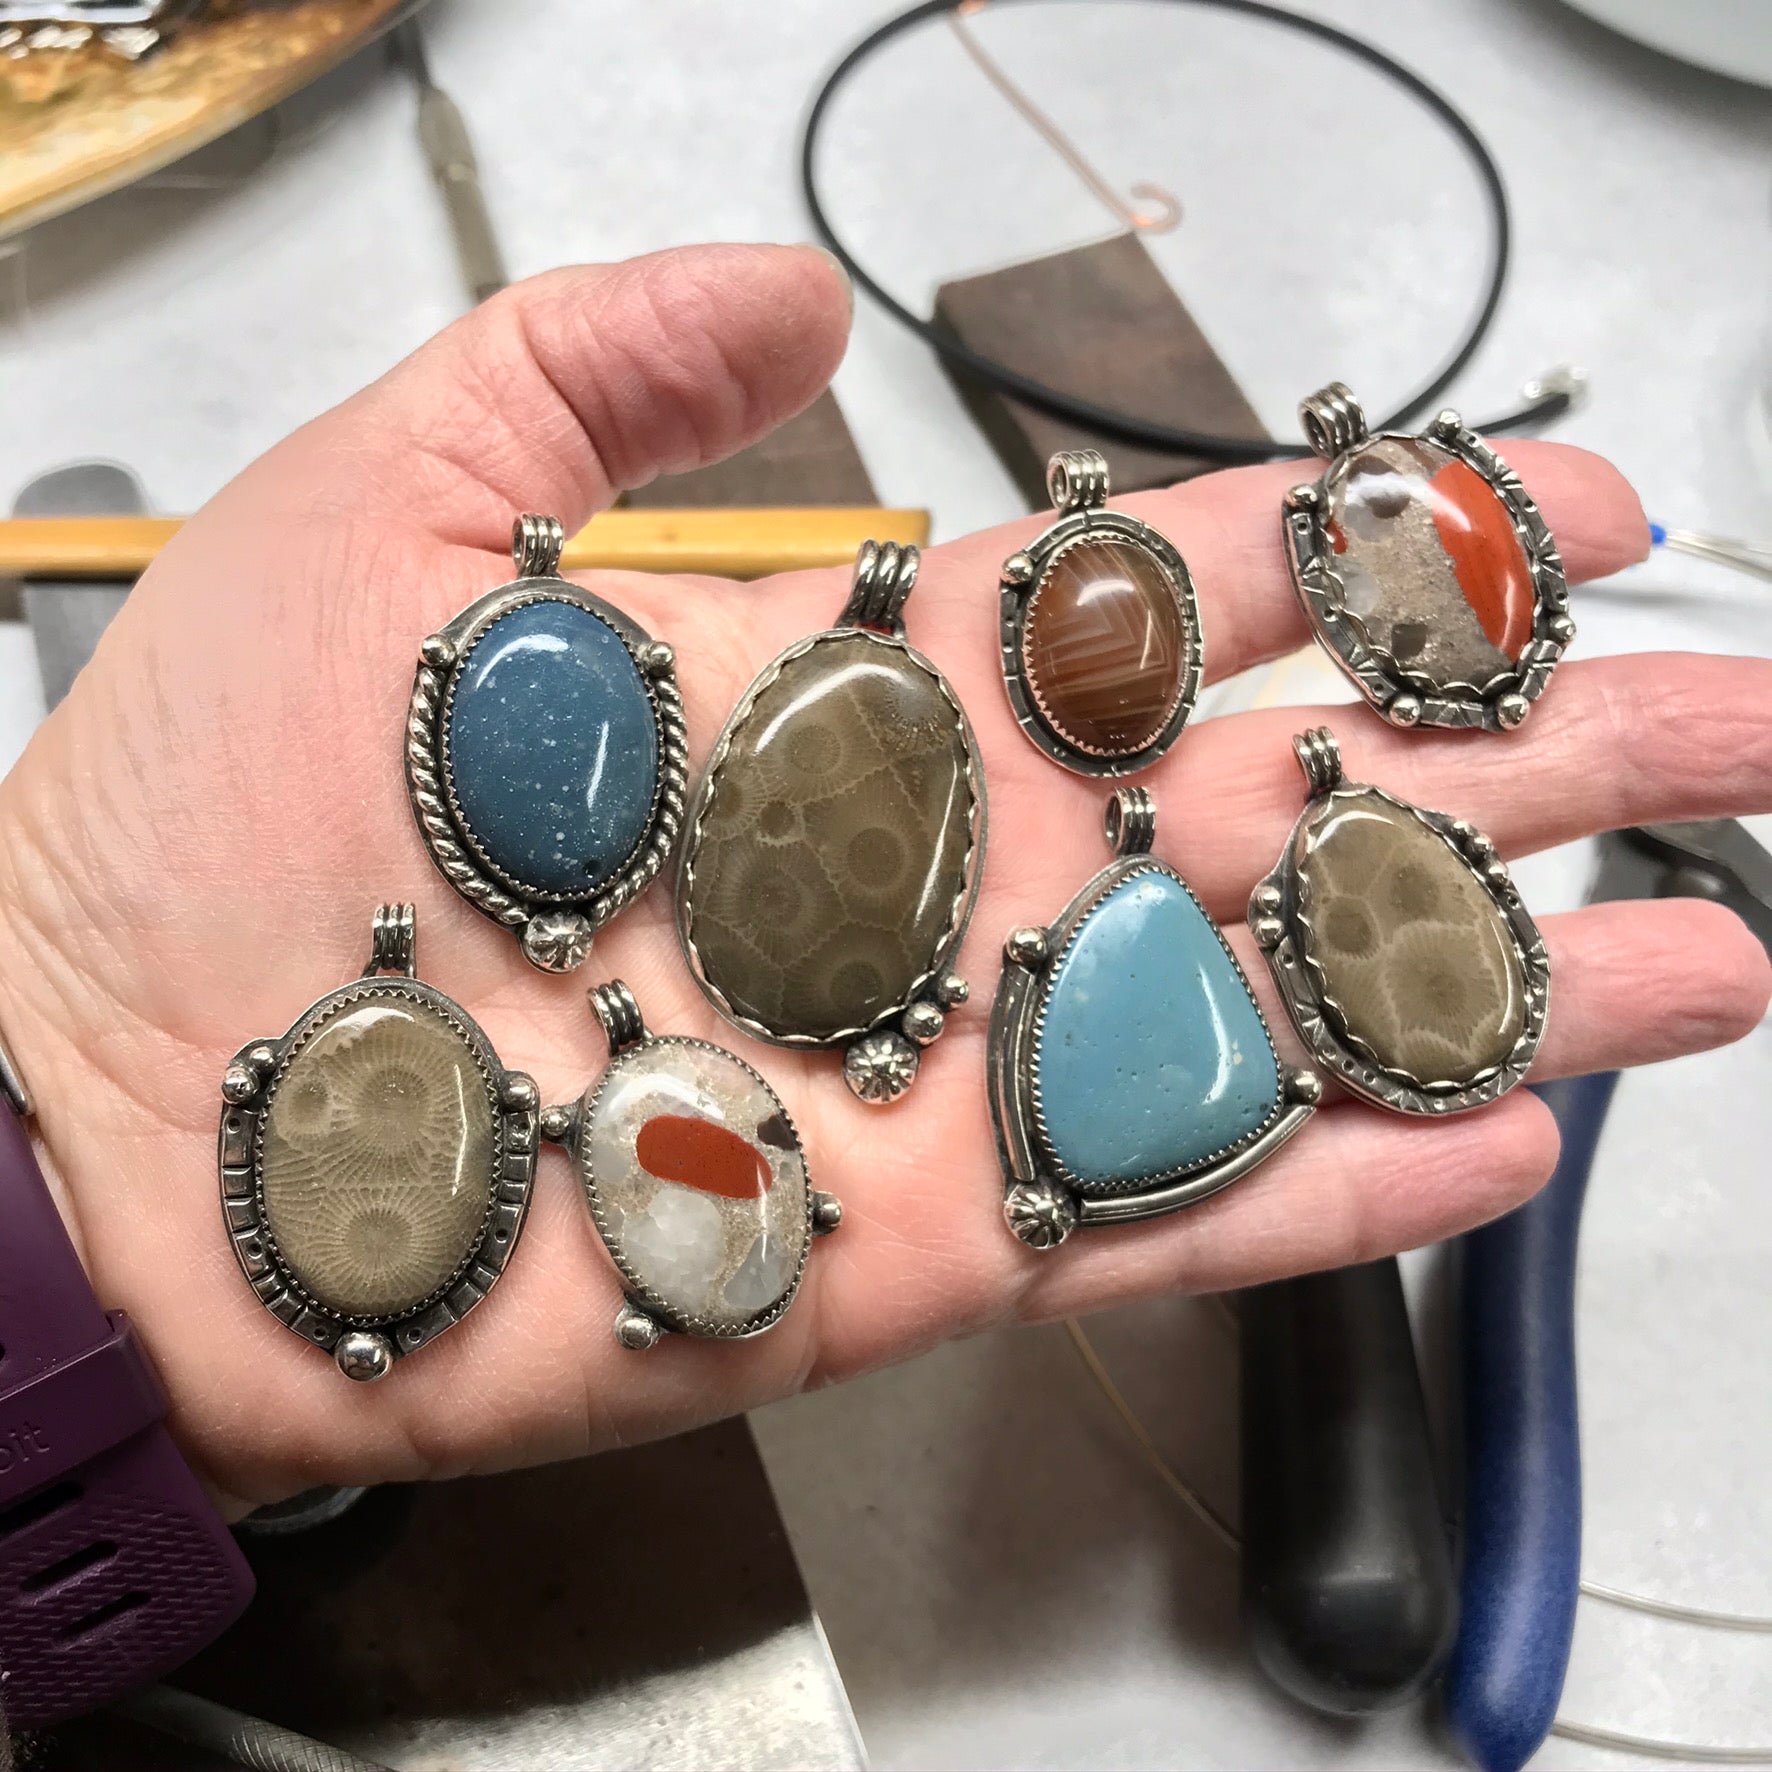 Hand holding various Lake Superior area and Michigan (Upper Peninsula) stone pendants including Petoskey Stones, Leland Blue, Lake Superior Agates and Pudding Stones in Sterling Silver settings made by Synthia Marsh Jewelry